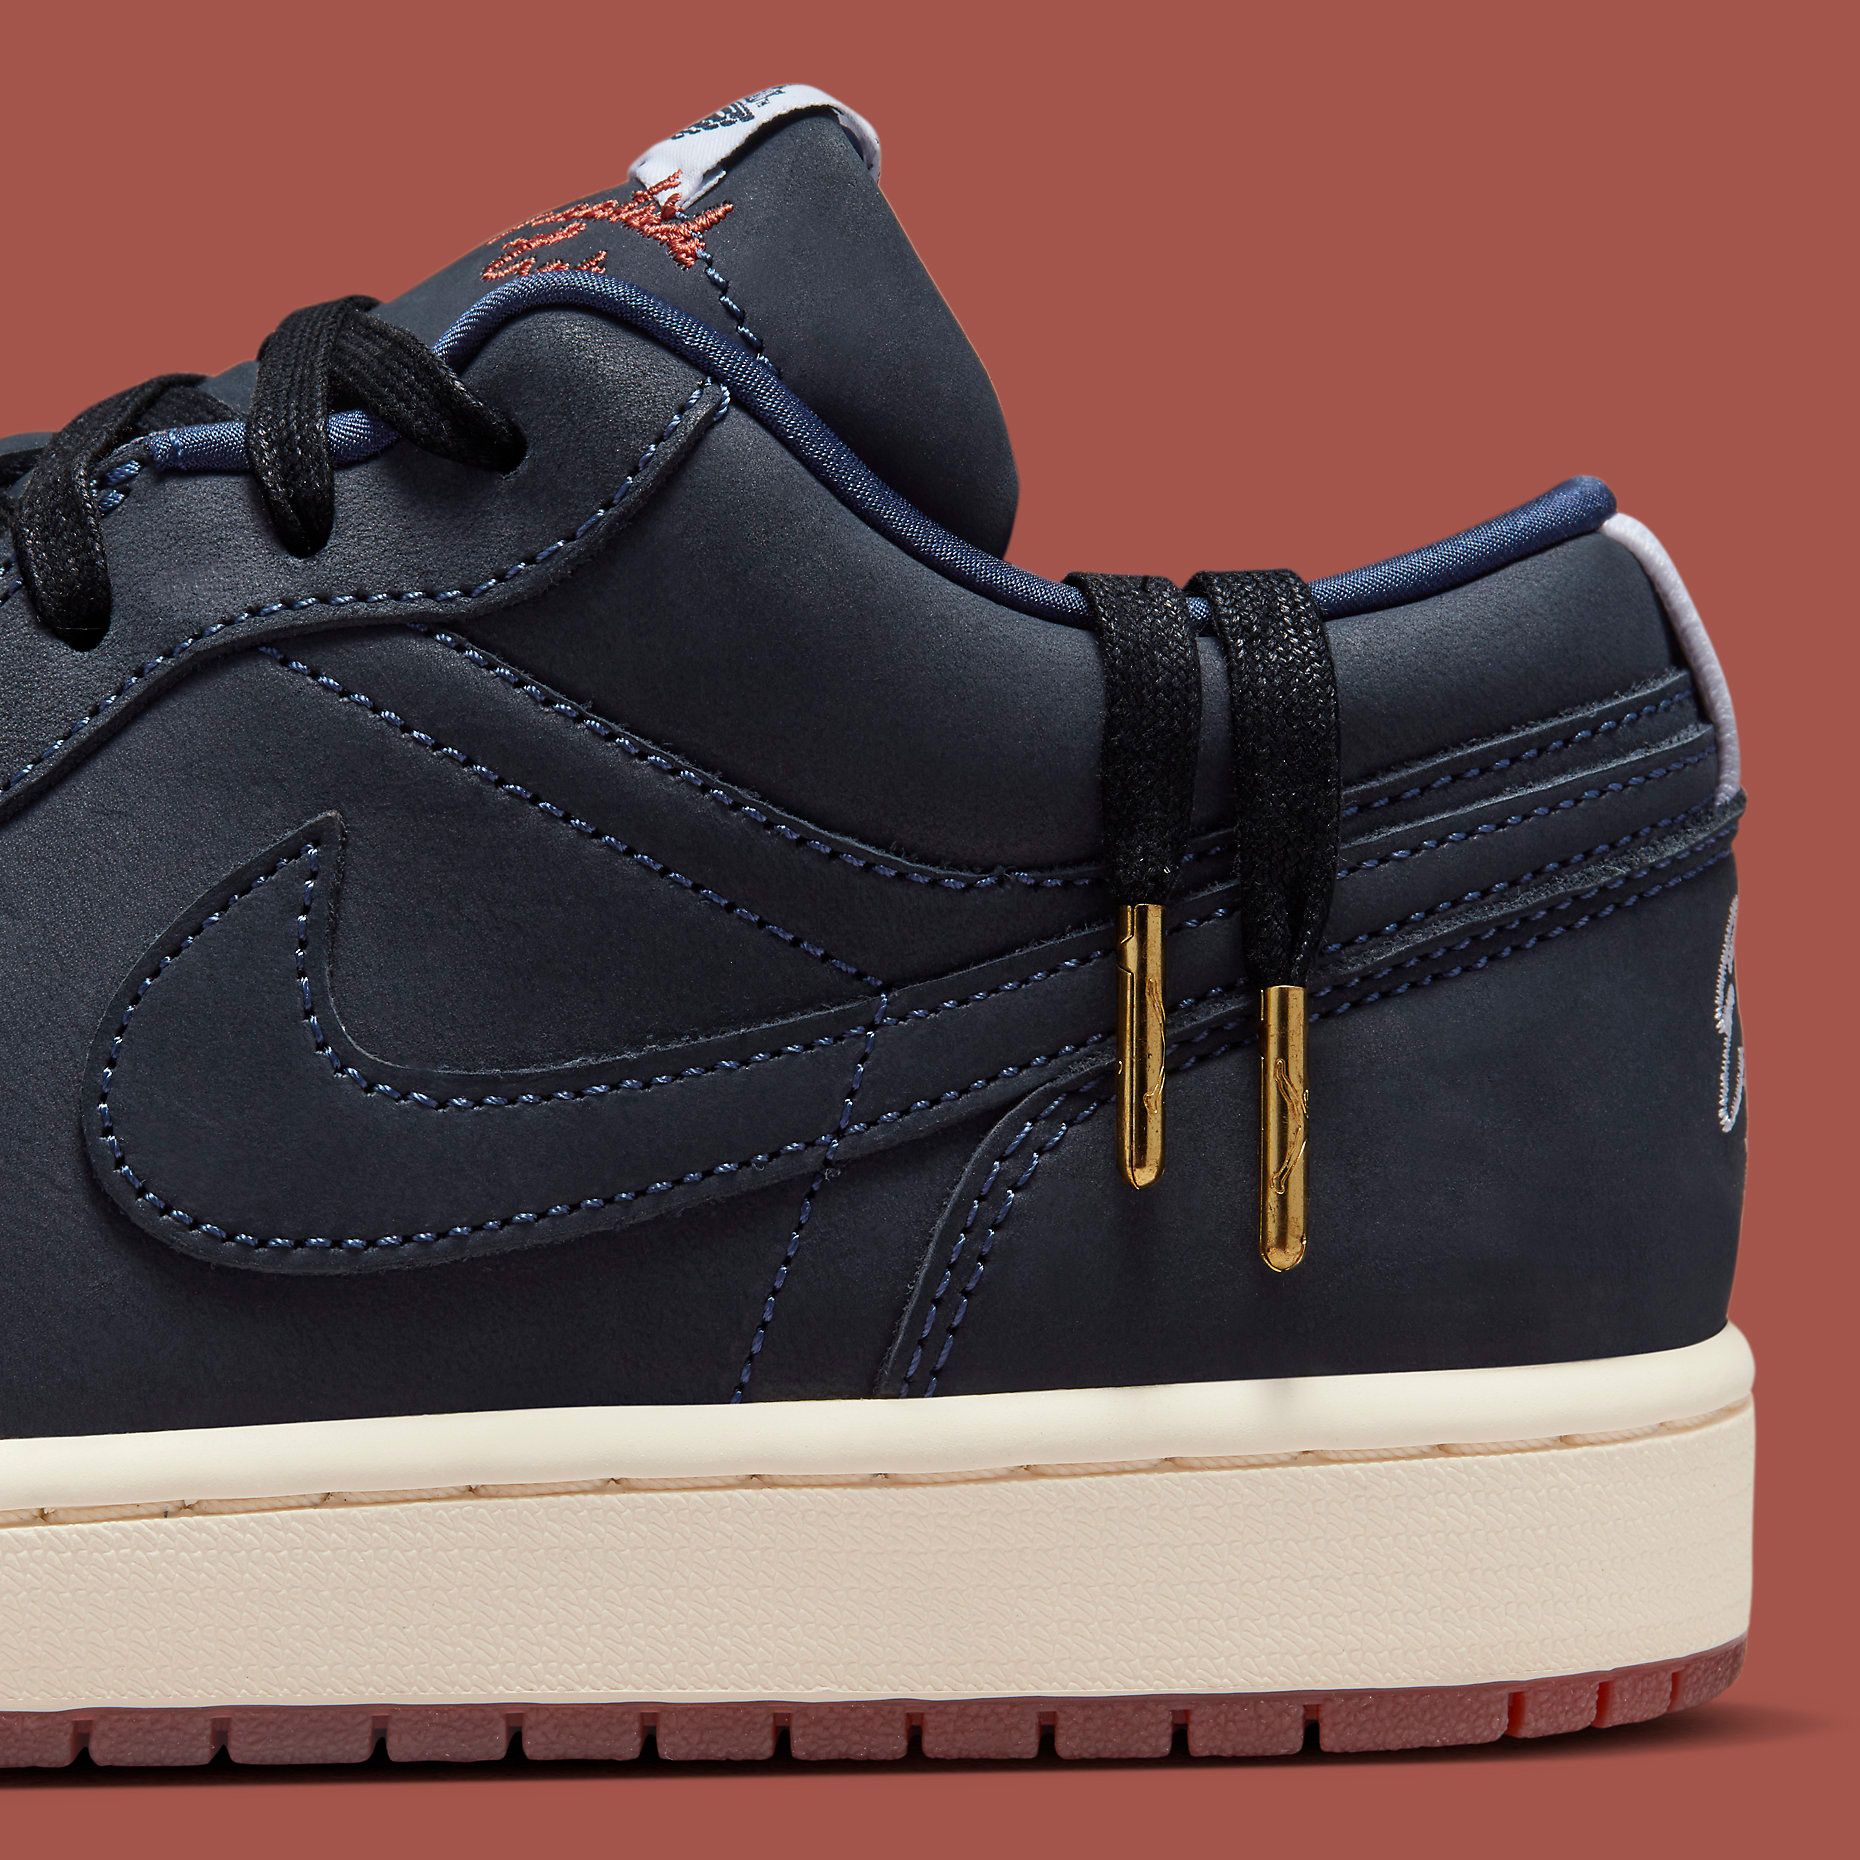 Where to Buy the Eastside Golf x Air Jordan 1 Low | House of Heat°